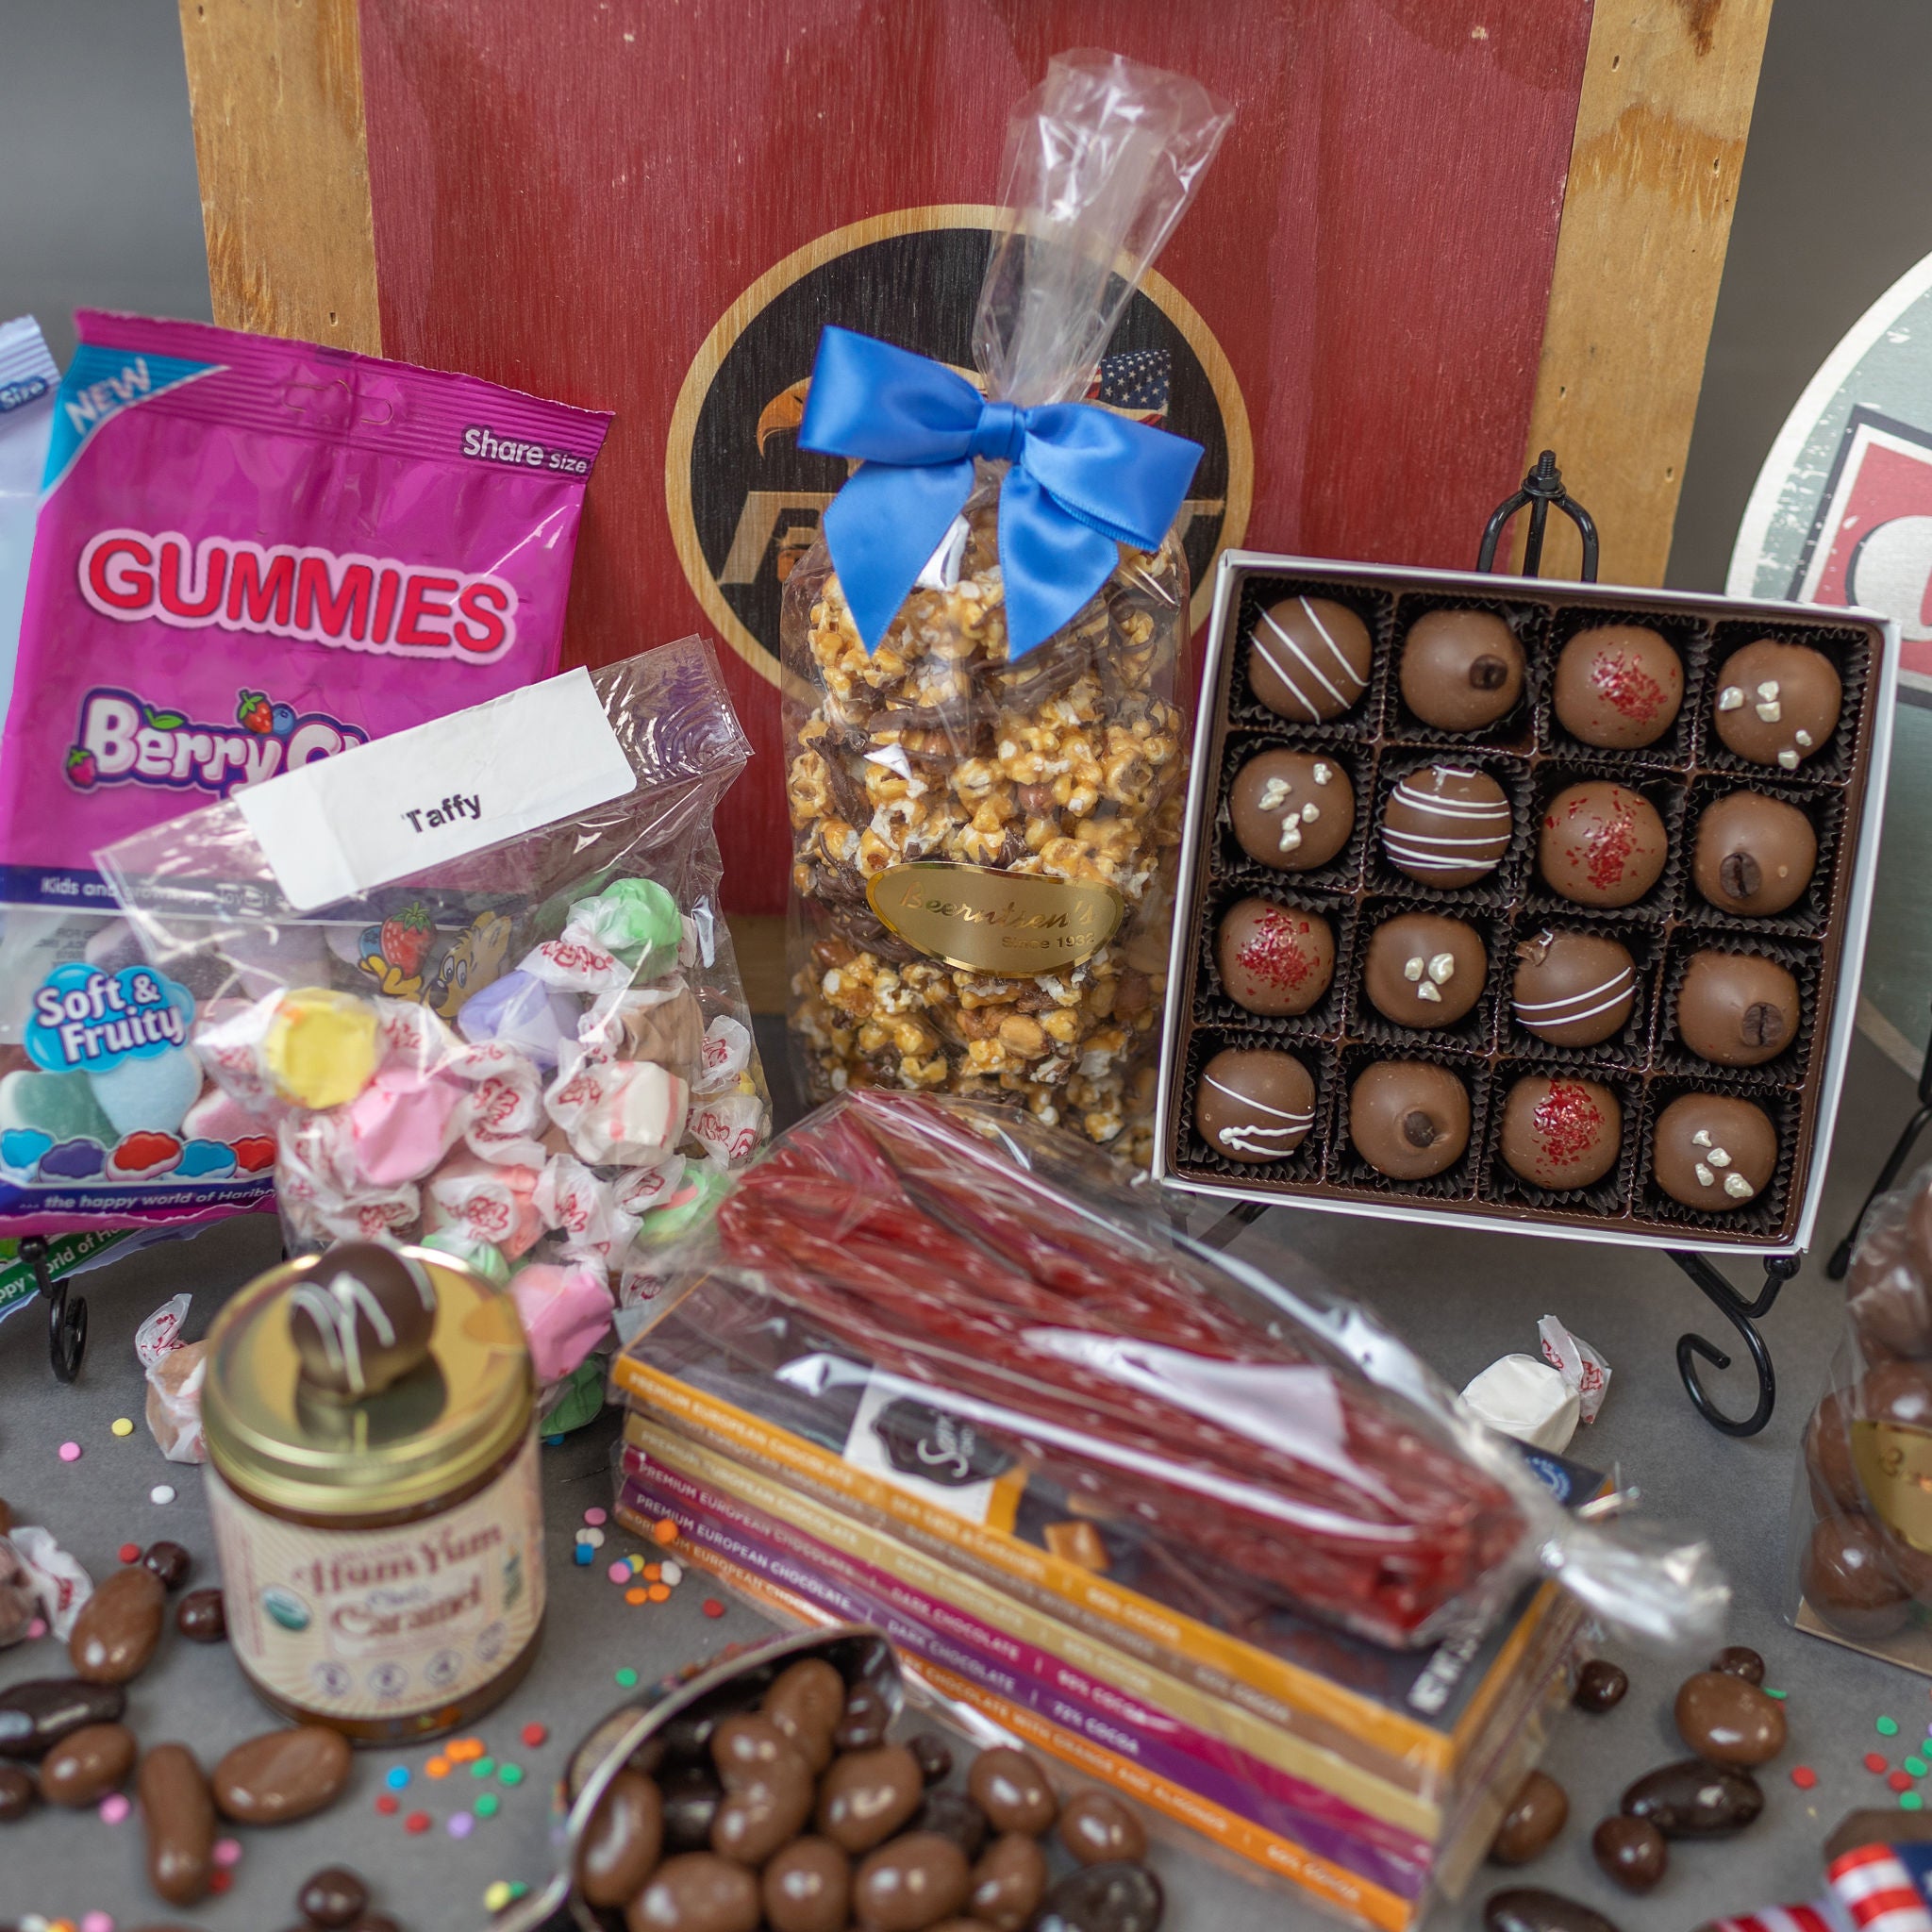 Valentine's Day Baskets from The Sweet Tooth